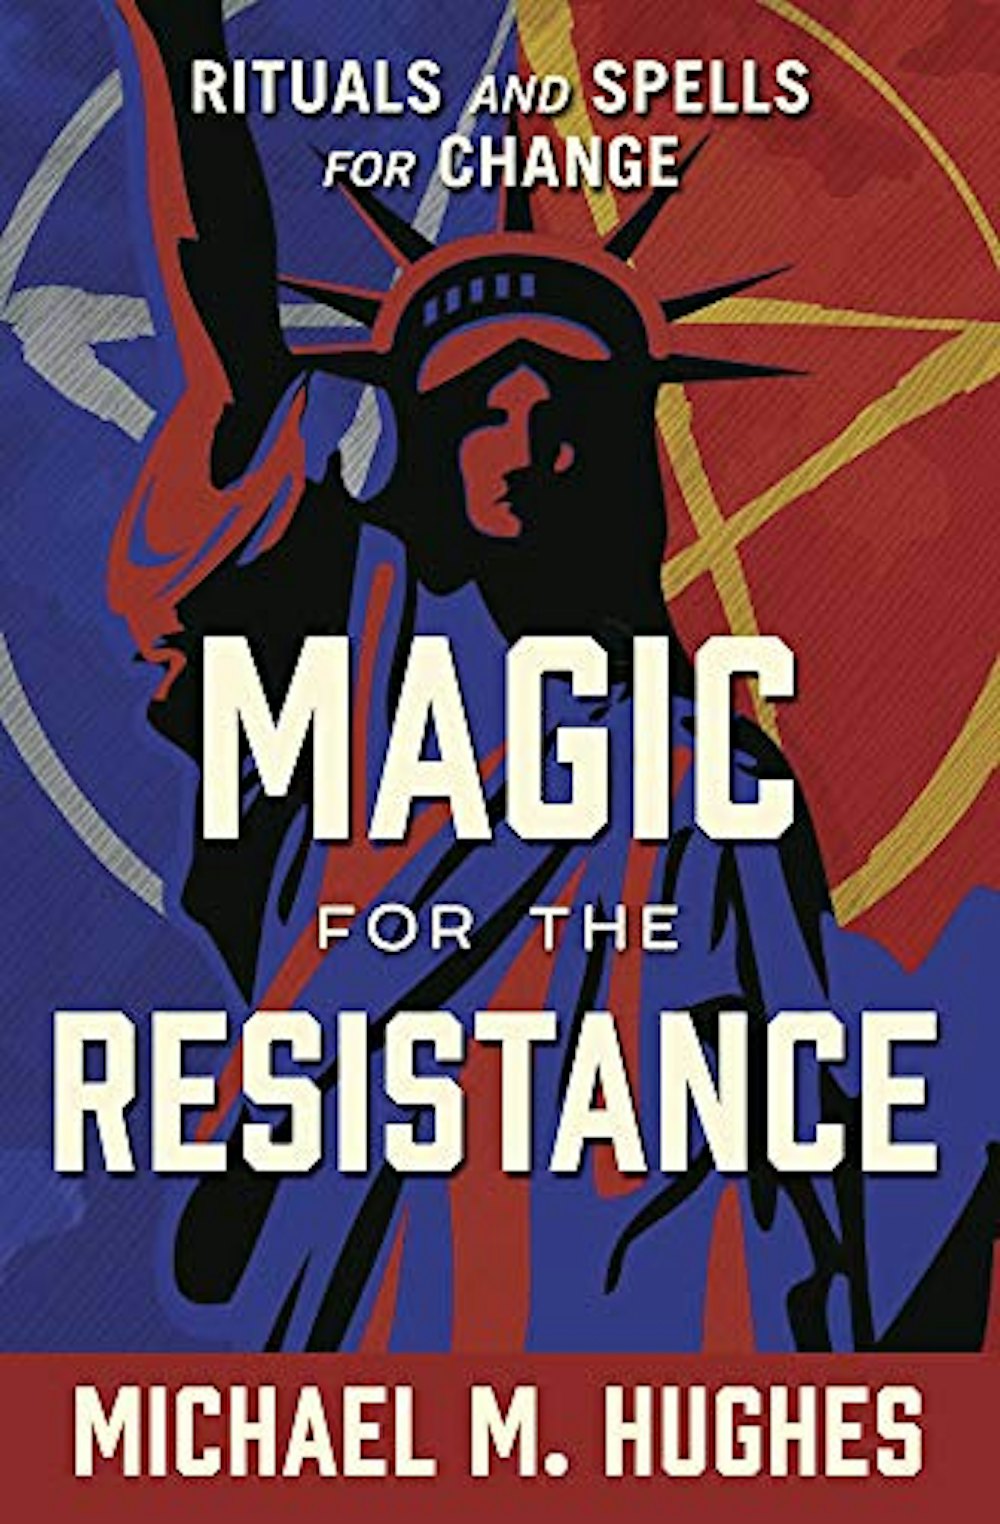 "Magic for the Resistance: Rituals and Spells for Change" by Michael M. Hughes